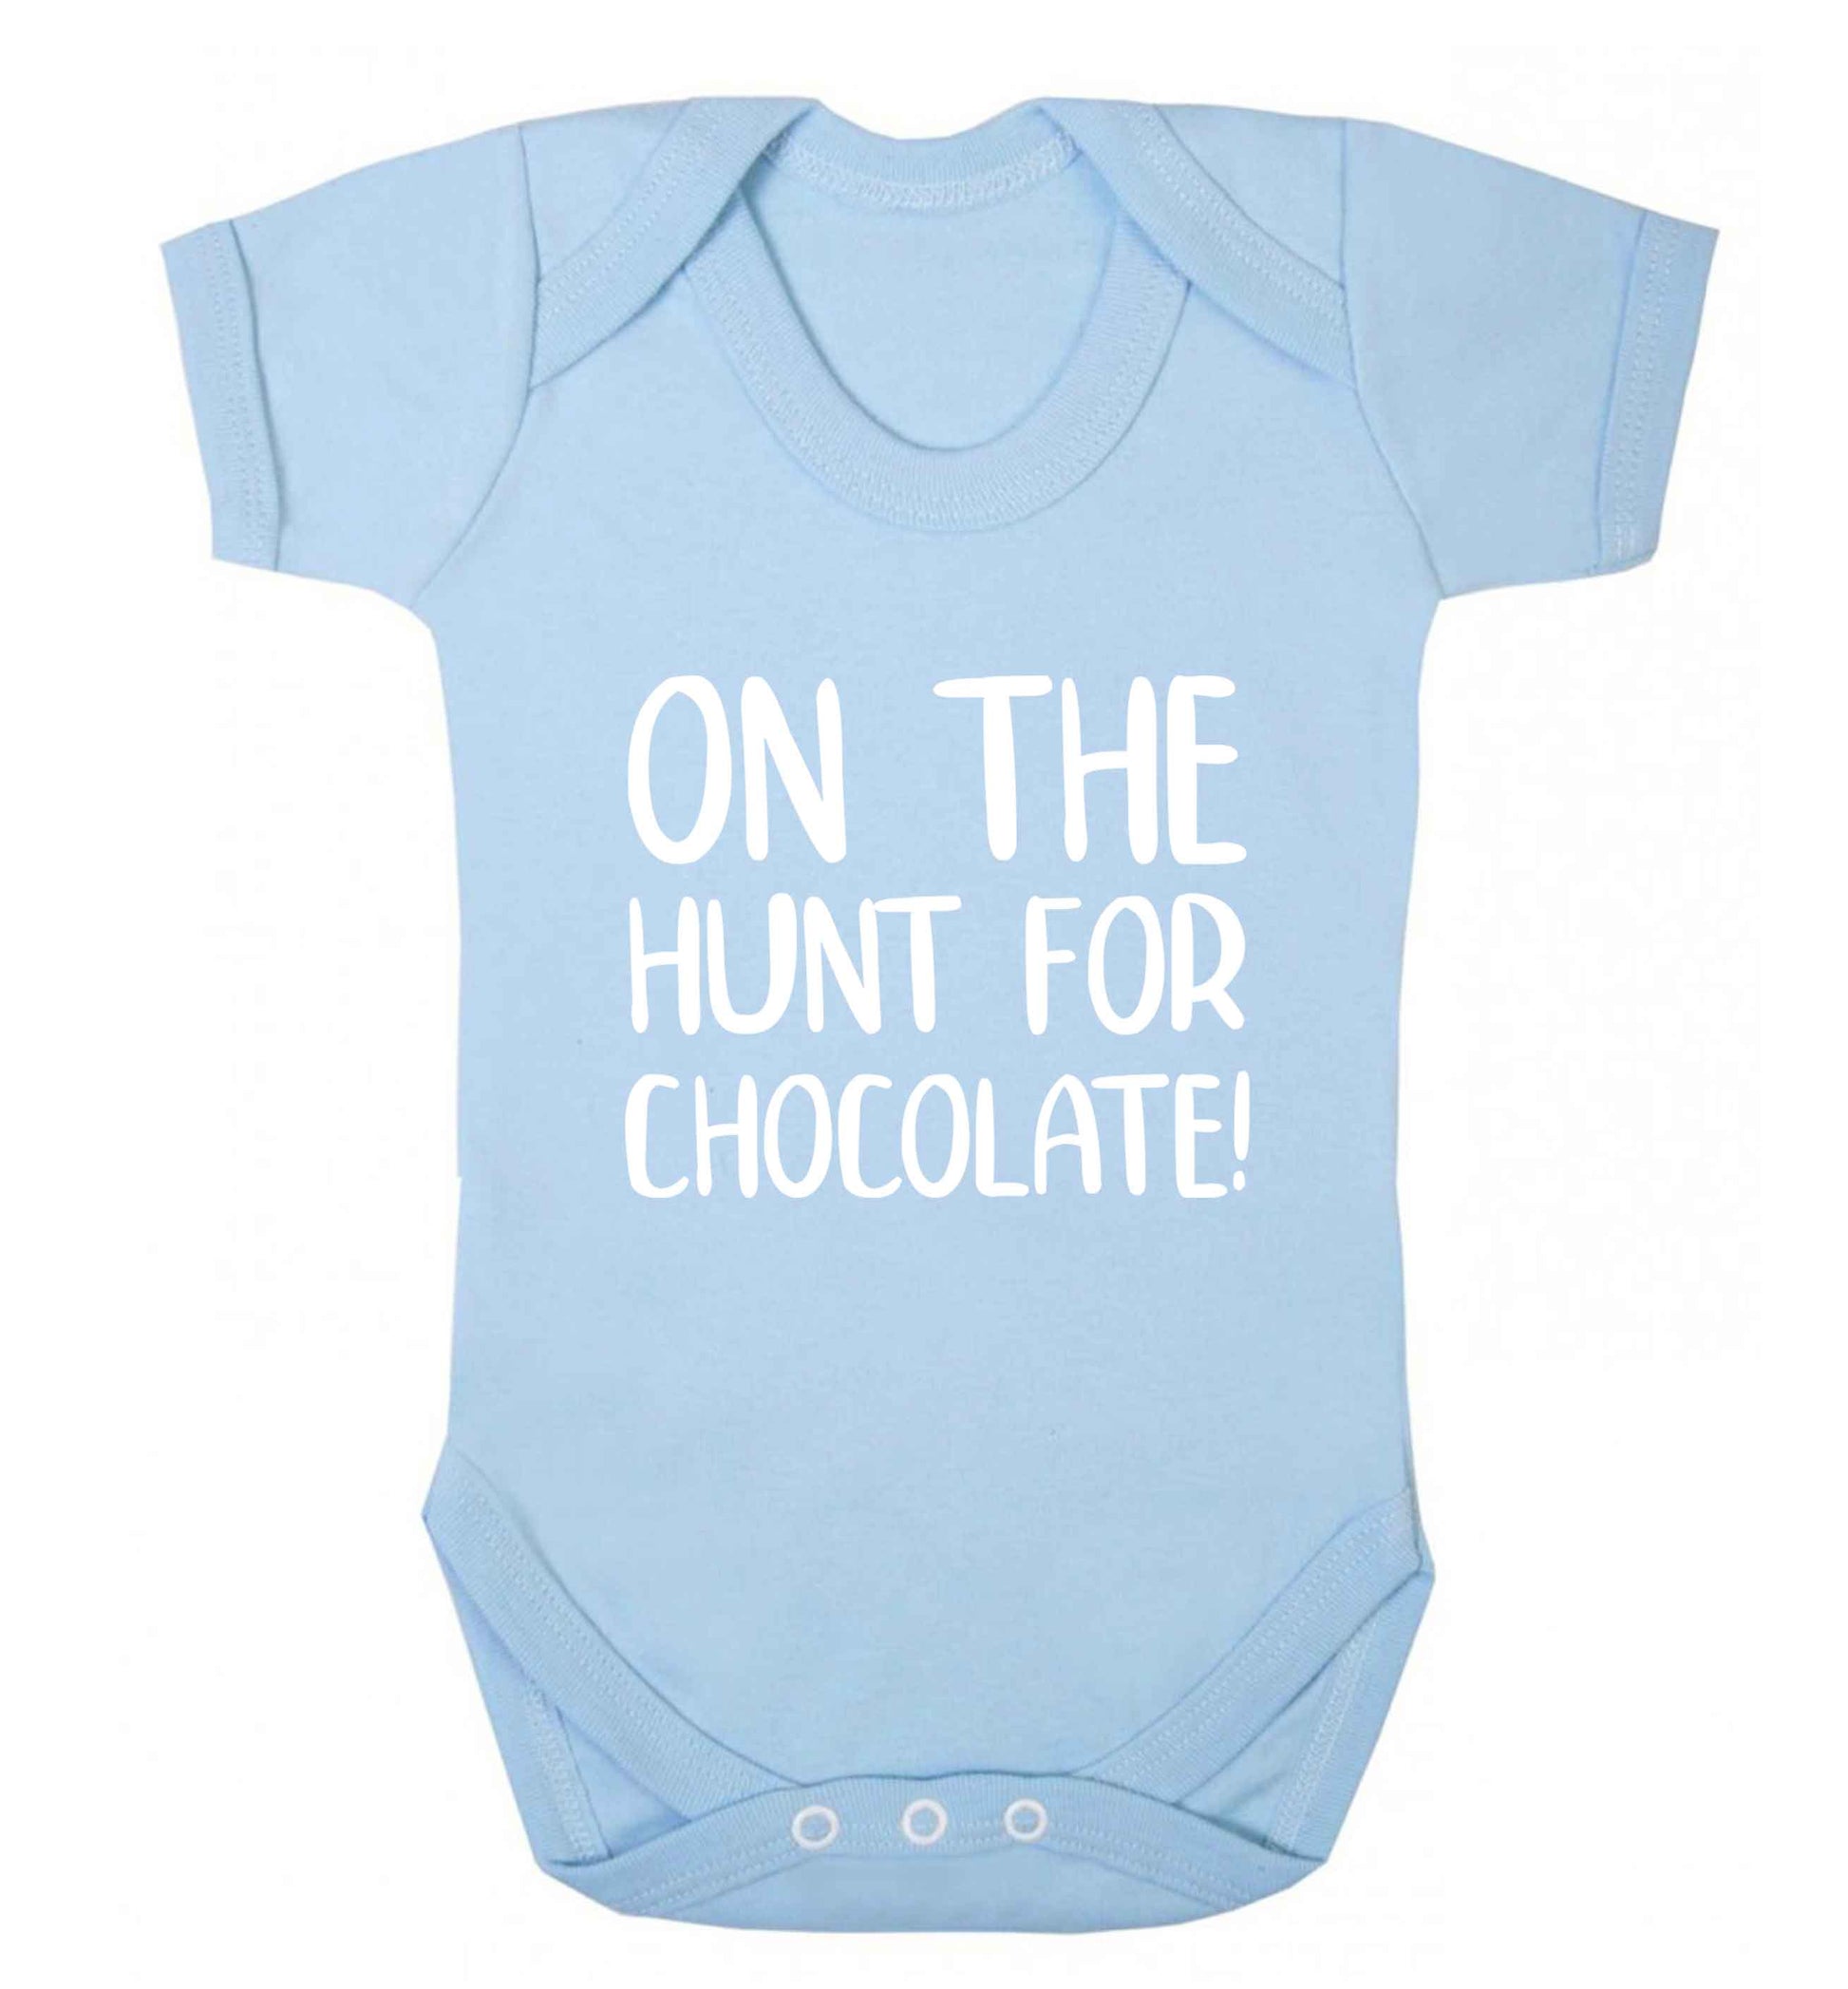 On the hunt for chocolate! baby vest pale blue 18-24 months